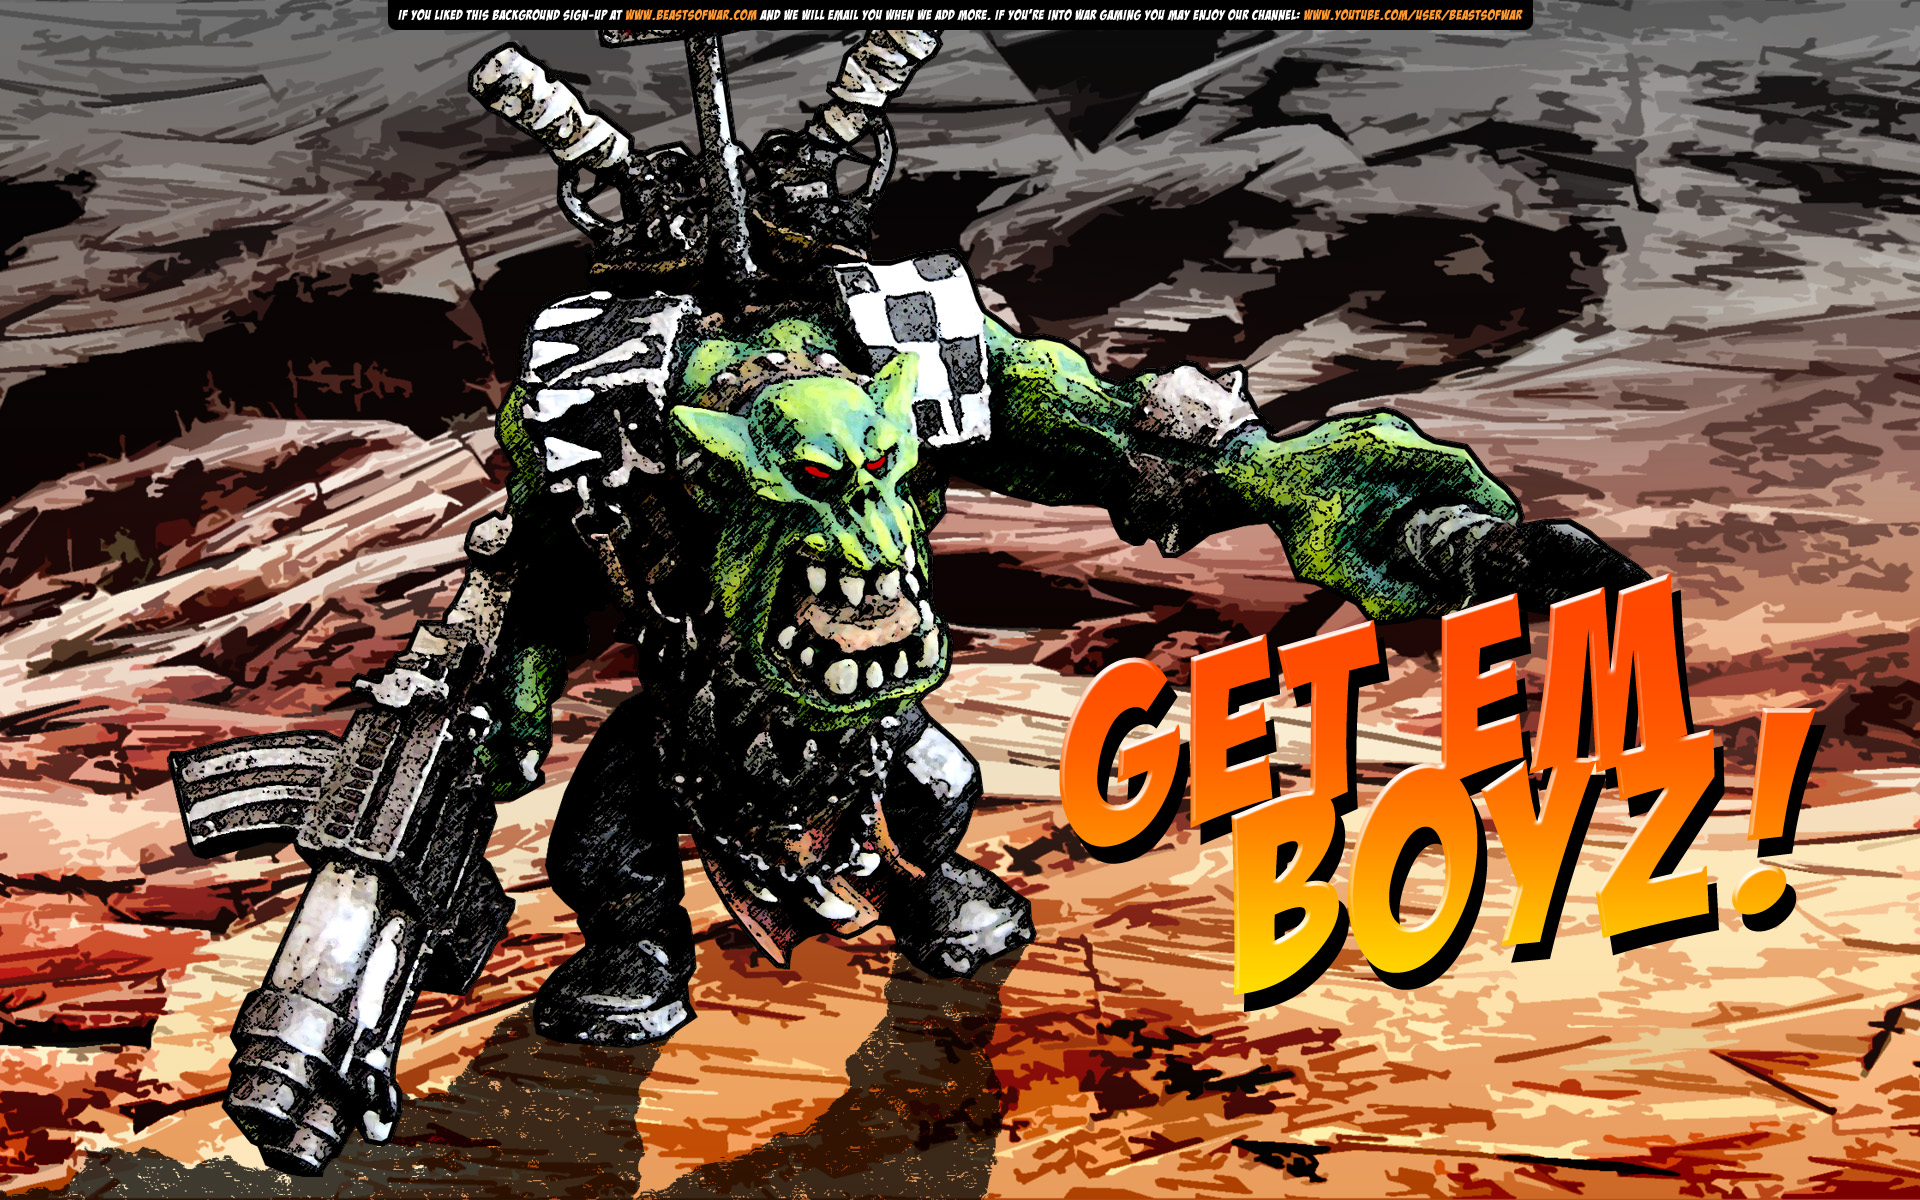 Ork Boss Wallpaper Image Orc And Orks Fantasy